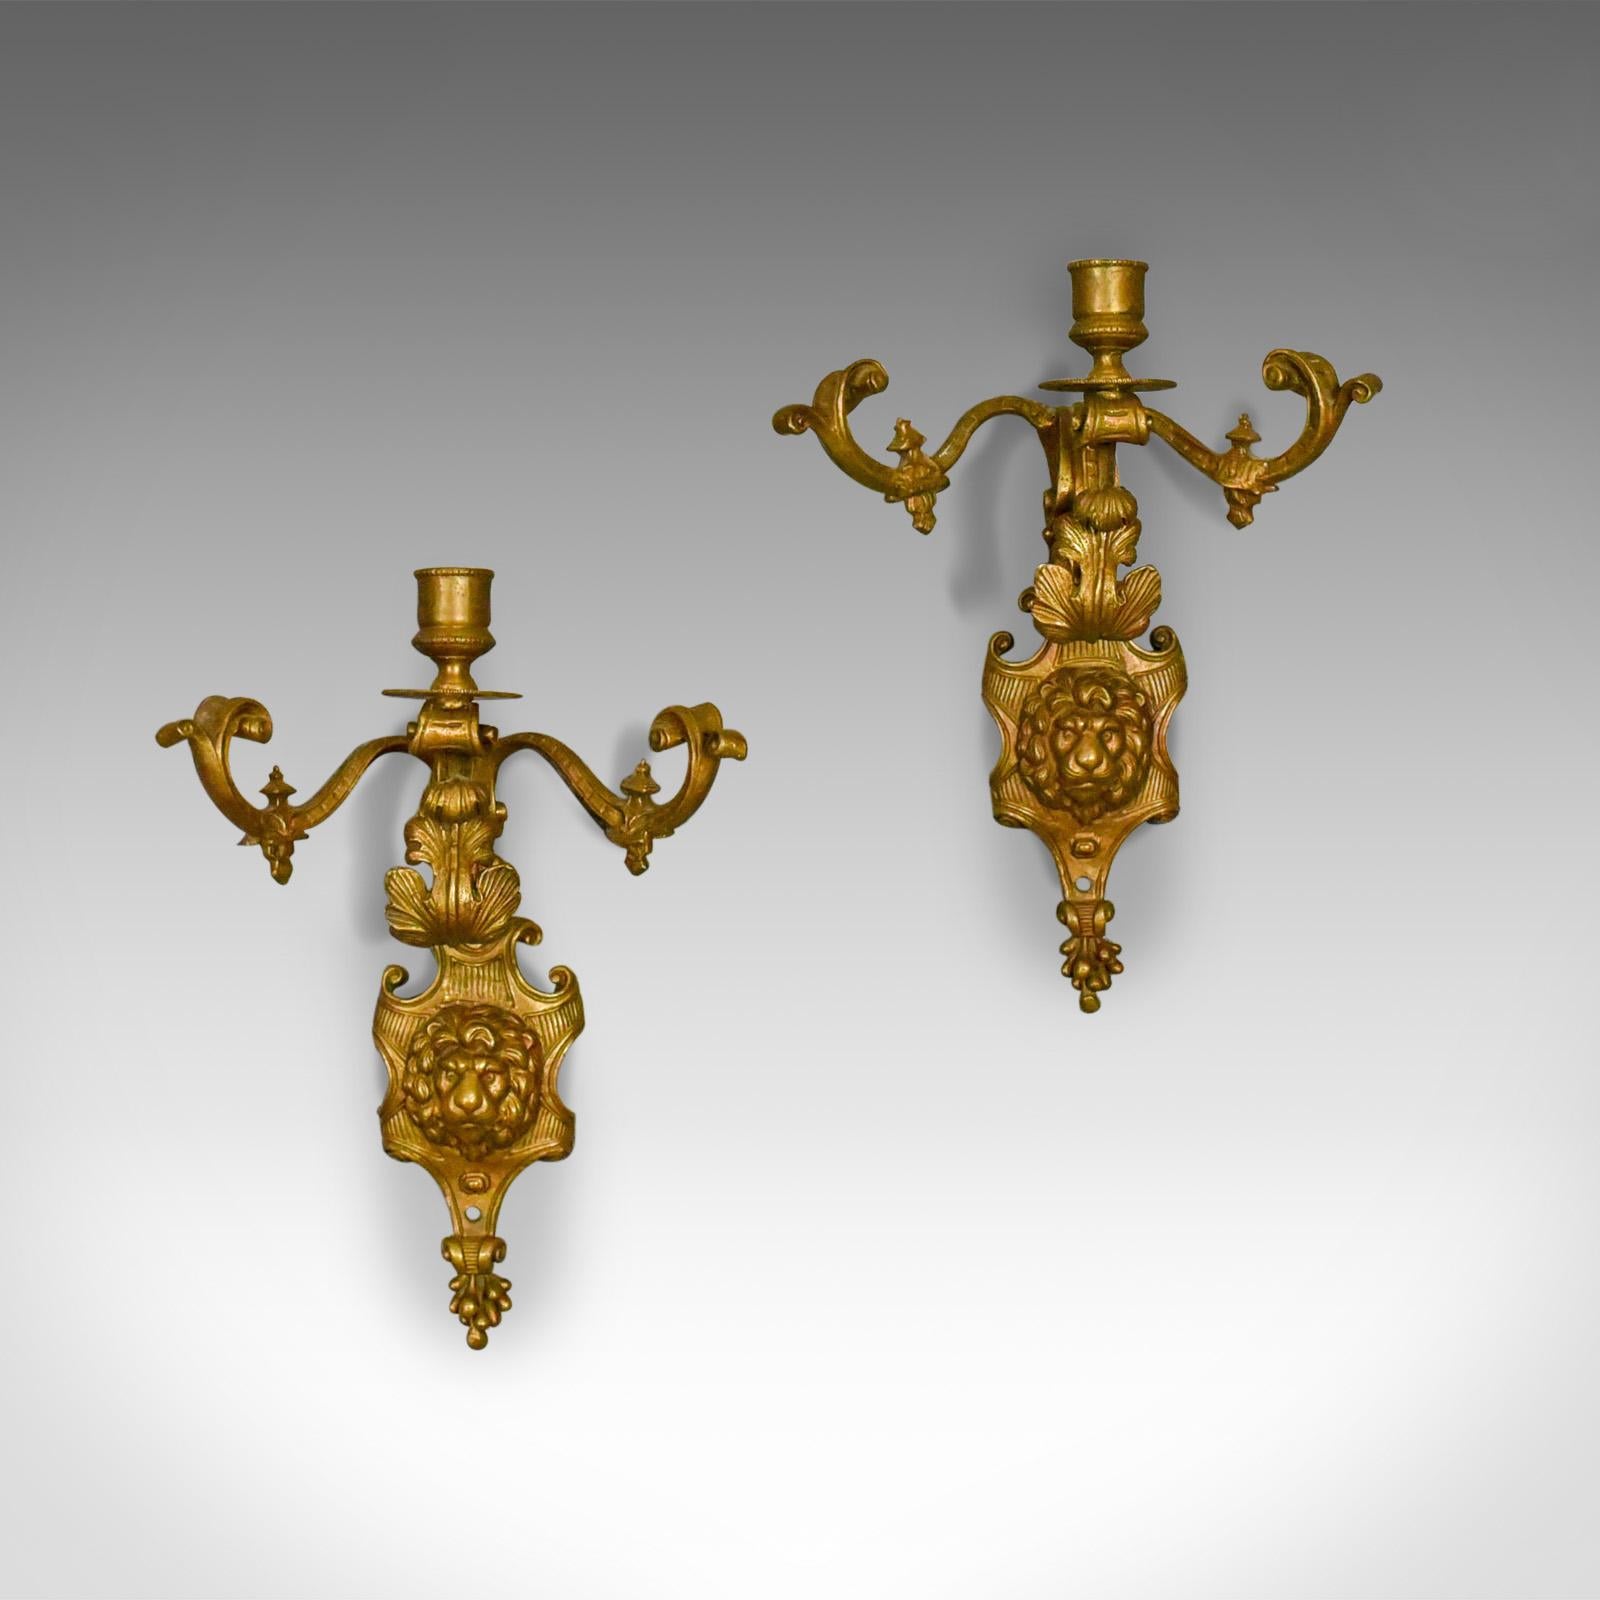 This is a pair of antique wall sconces, English, Victorian, gilt metal candle stands dating to circa 1900.

Delightful pair of gilt metal wall sconces
Central candle stand over scrolled foliate detail
Flanked by a pair of serpentine decorative